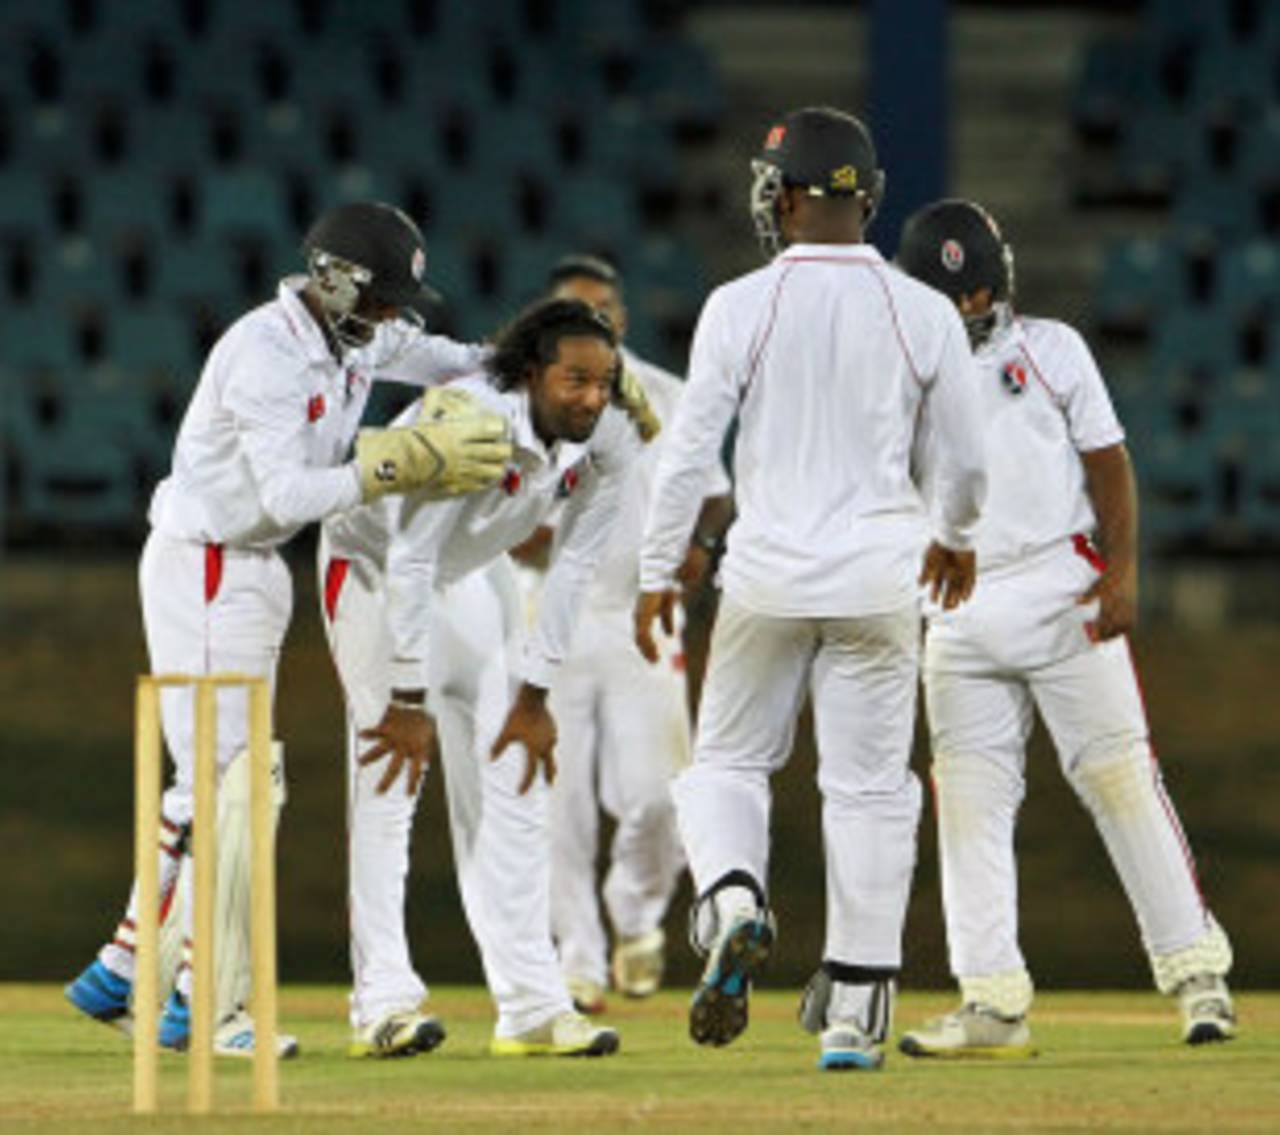 Team-mates congratulate Imran Khan after he took a wicket, Trinidad & Tobago v Combined Campuses and Colleges, Regional Four Day Competition, Port of Spain, March 30, 2014